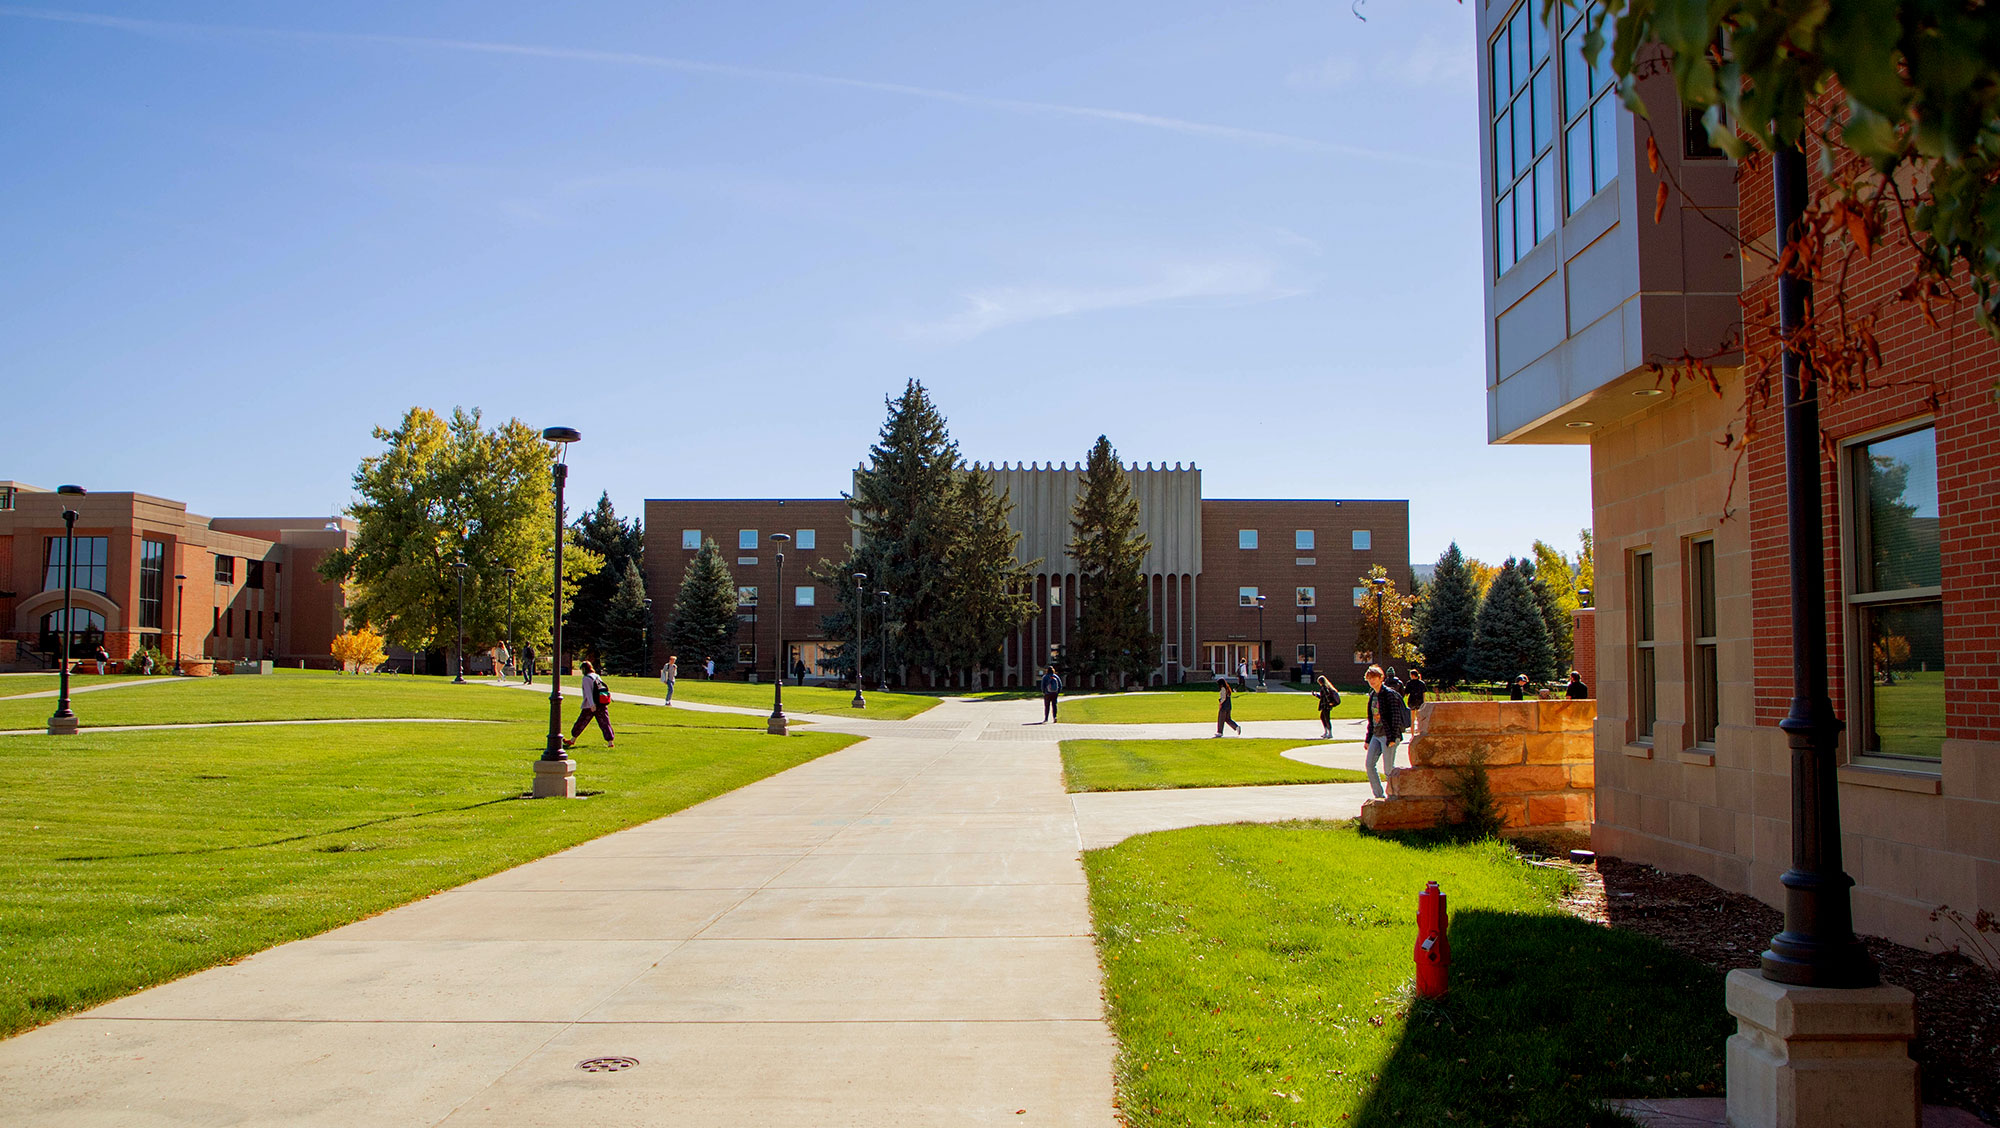 Image of Jonas Hall in the late summer. Sunny day. Students are walking across the BHSU campus.